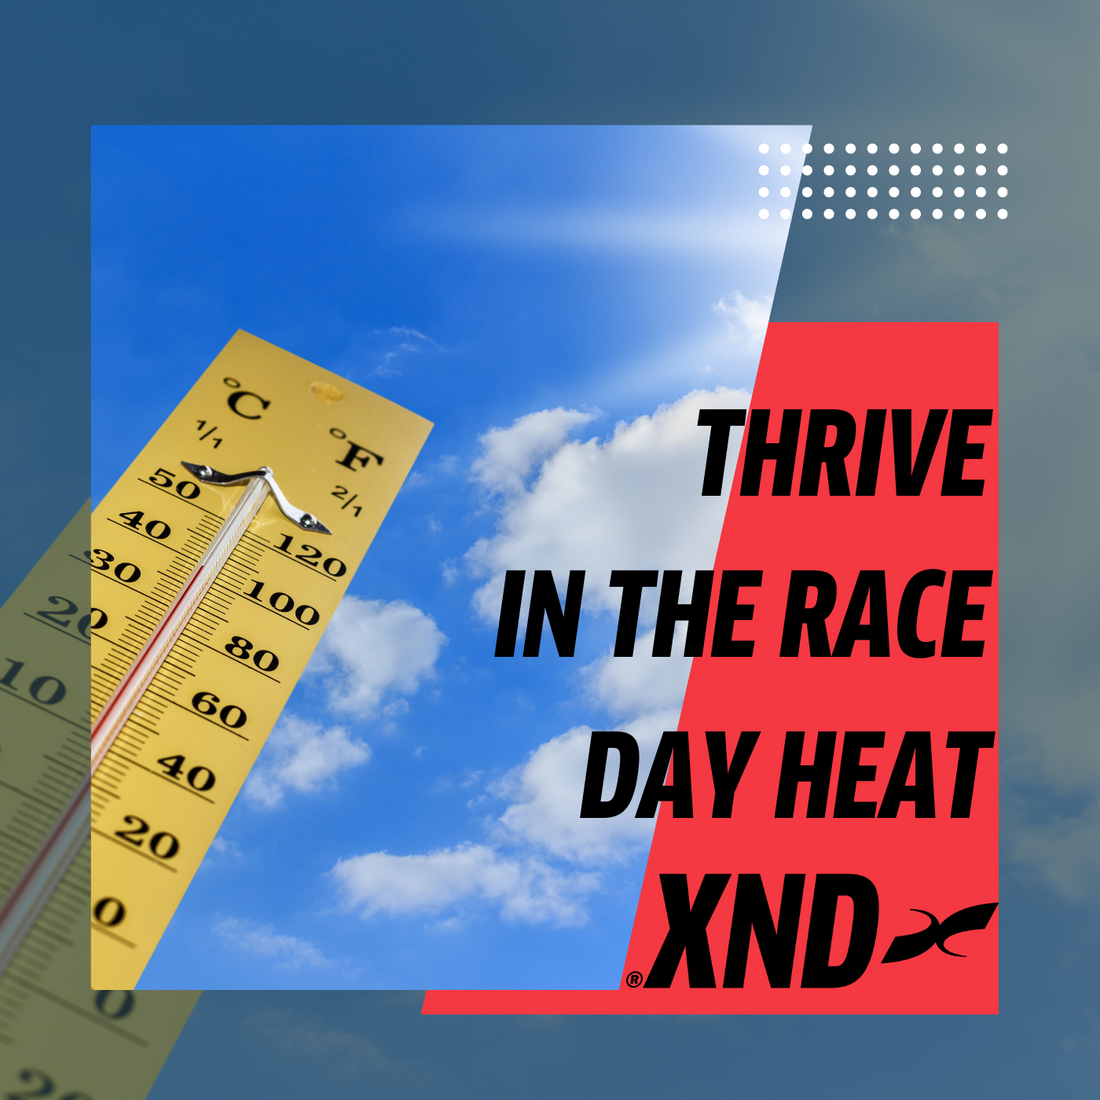 Thrive in race day heat